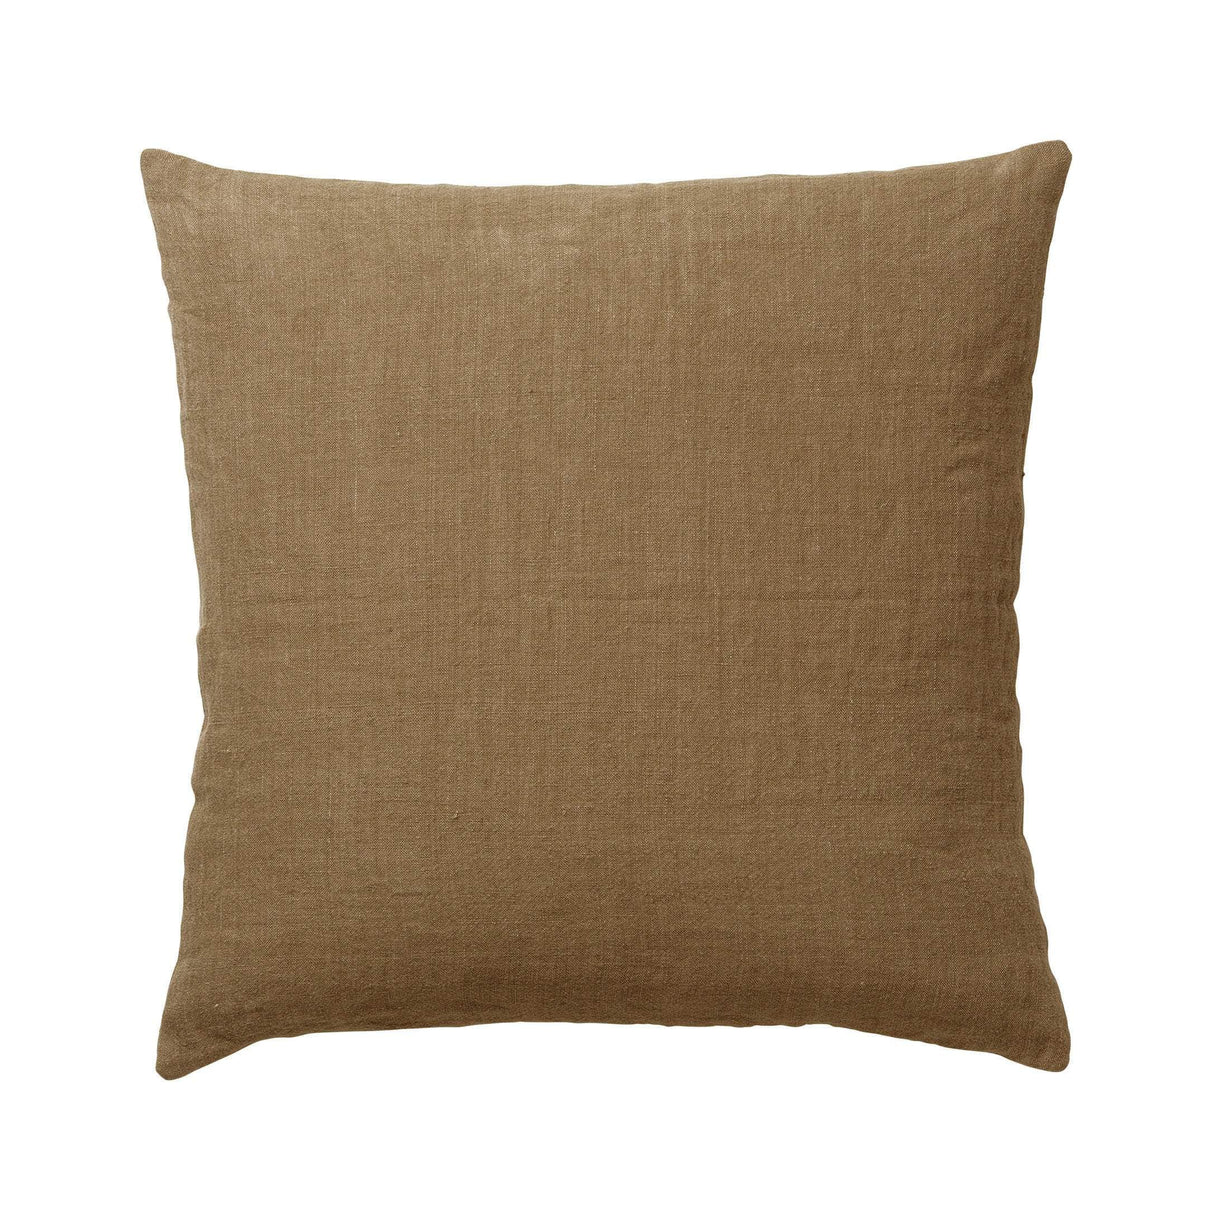 Cozy Living Luxury Linen Cushion Mix incl. Inners